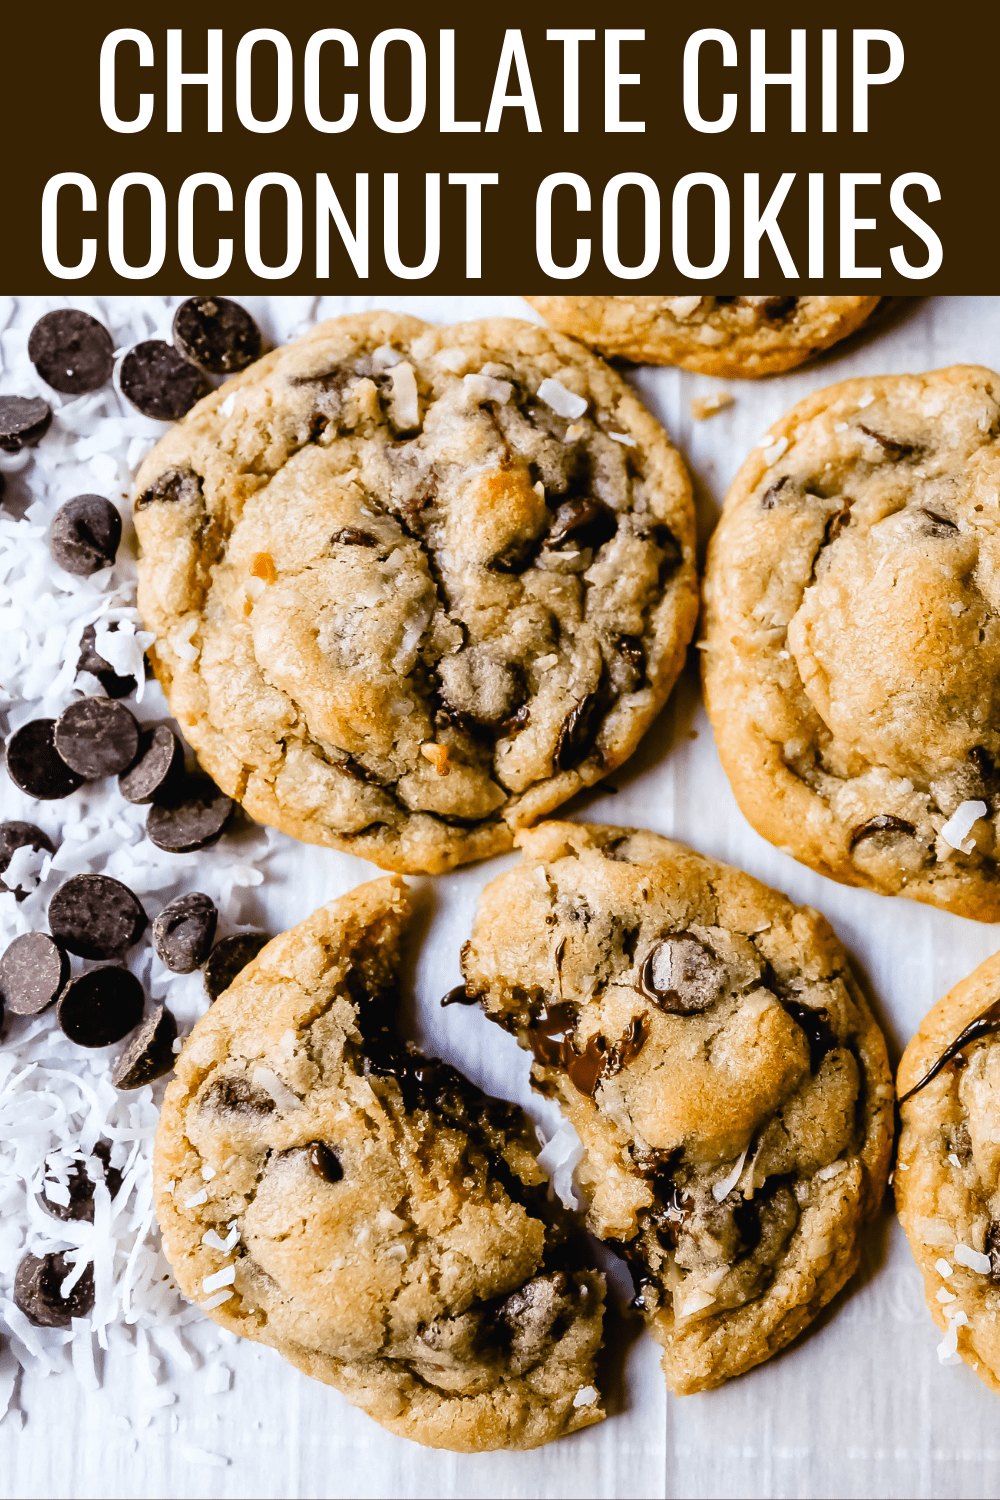 Chocolate Chip Coconut Cookies. Soft, chewy chocolate chip coconut cookies with semi-sweet chocolate and sweetened flaked coconut. The perfect chocolate coconut cookies! www.modernhoney.com #cookies #chocolate #chocolatechipcookie #chocolatechipcookies #chocolatechipcoconut 